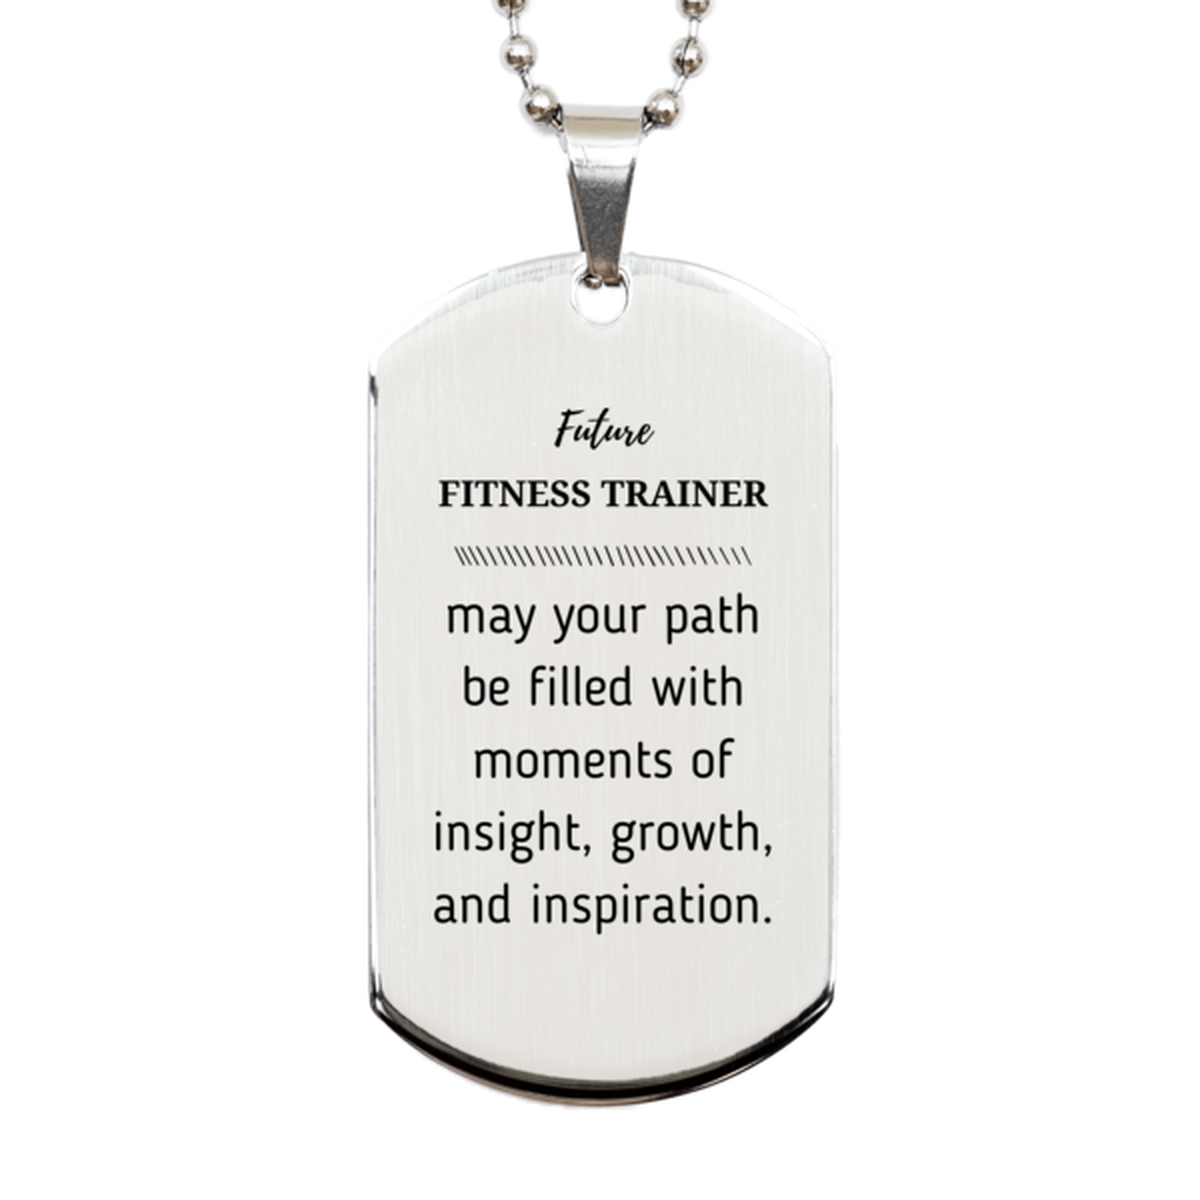 Future Fitness Trainer Gifts, May your path be filled with moments of insight, Graduation Gifts for New Fitness Trainer, Christmas Unique Silver Dog Tag For Men, Women, Friends